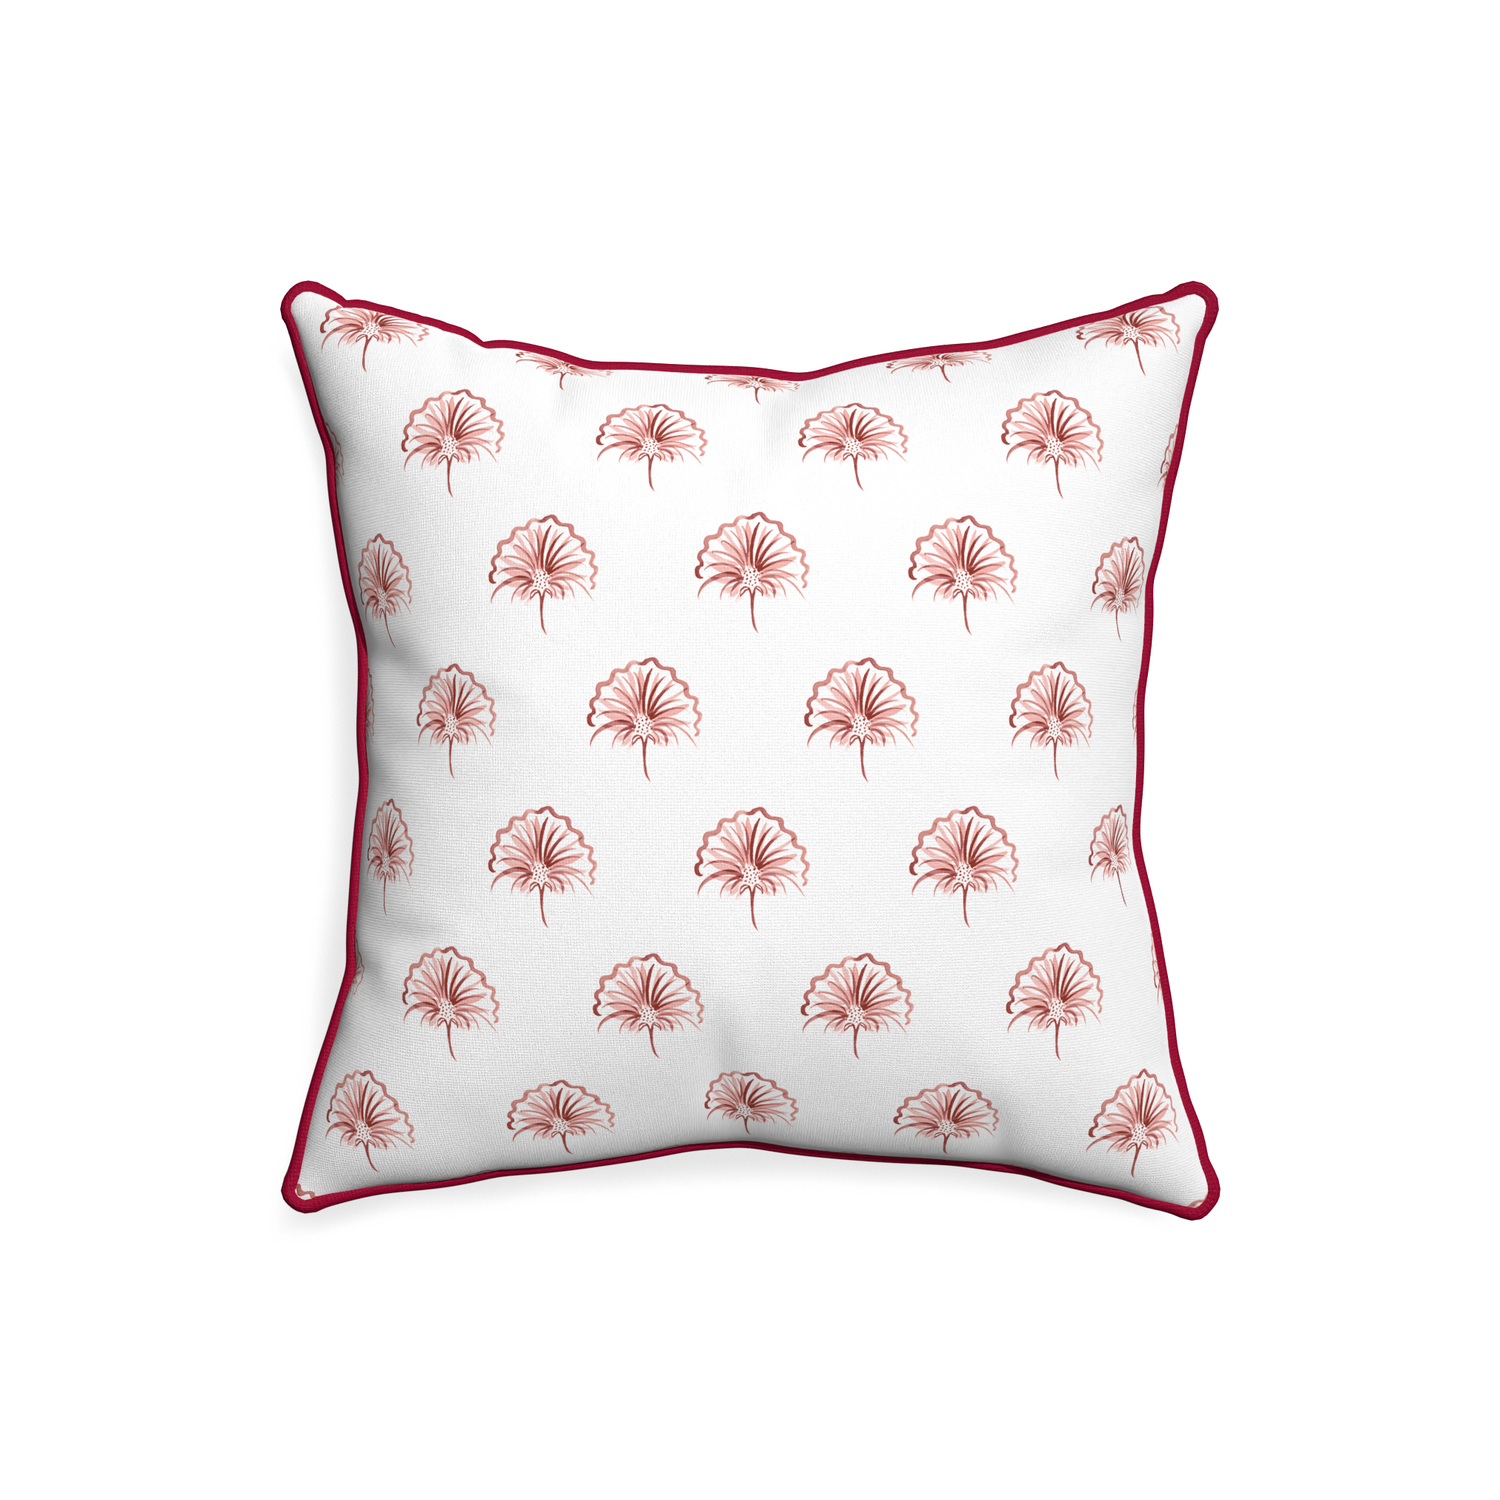 20-square penelope rose custom pillow with raspberry piping on white background